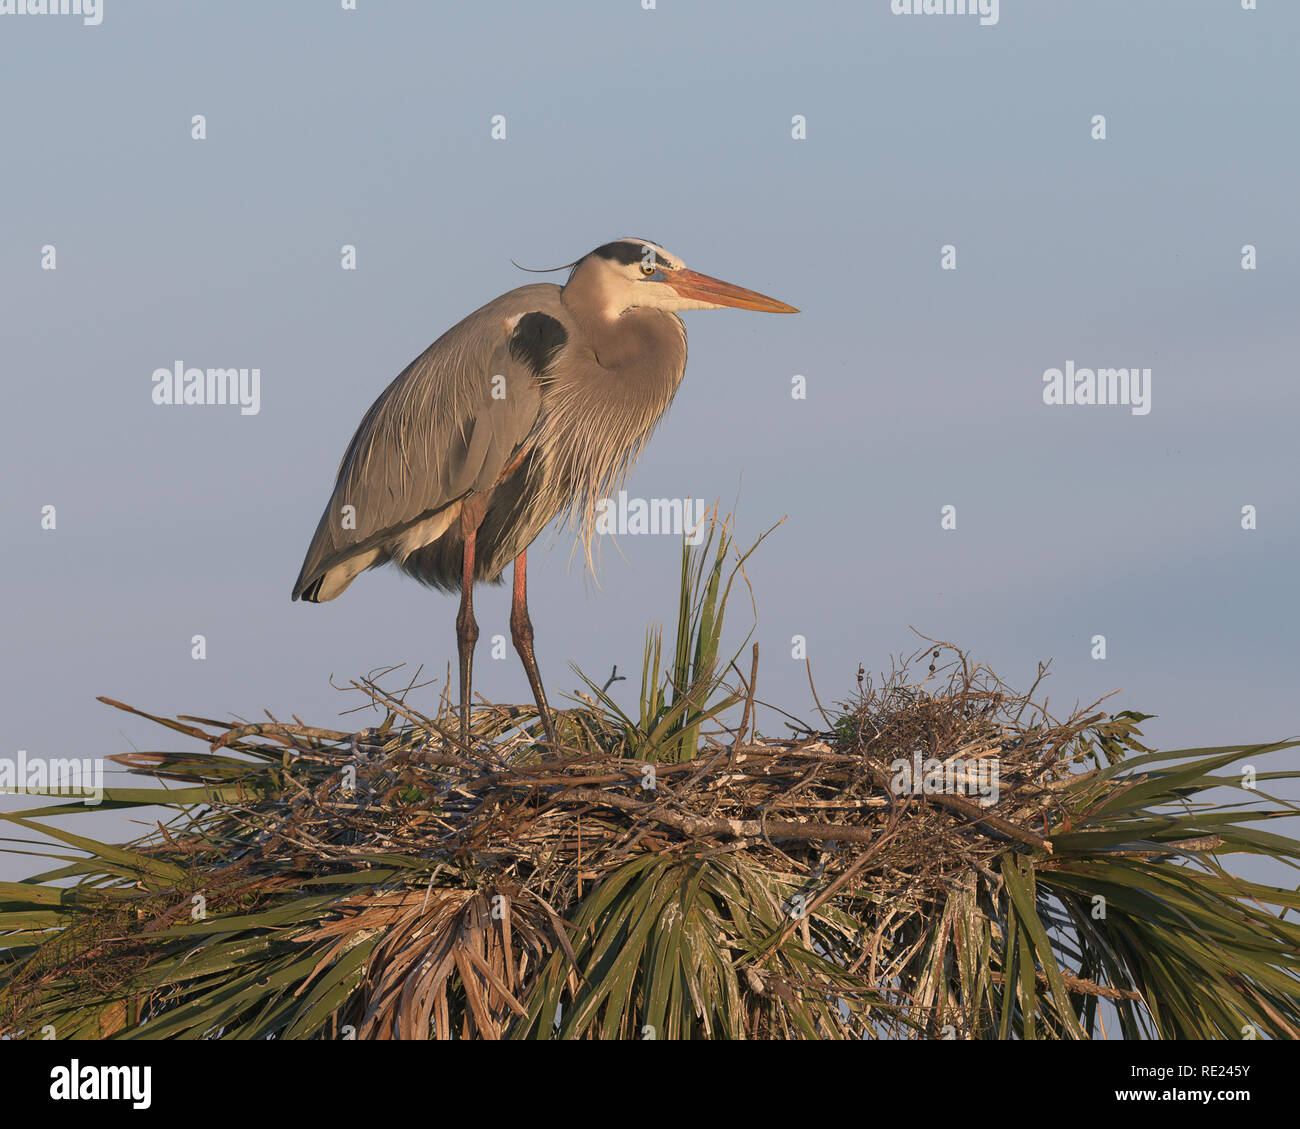 Female great blue heron standing on nest at the Viera Wetlands in Melbourne, Florida Stock Photo